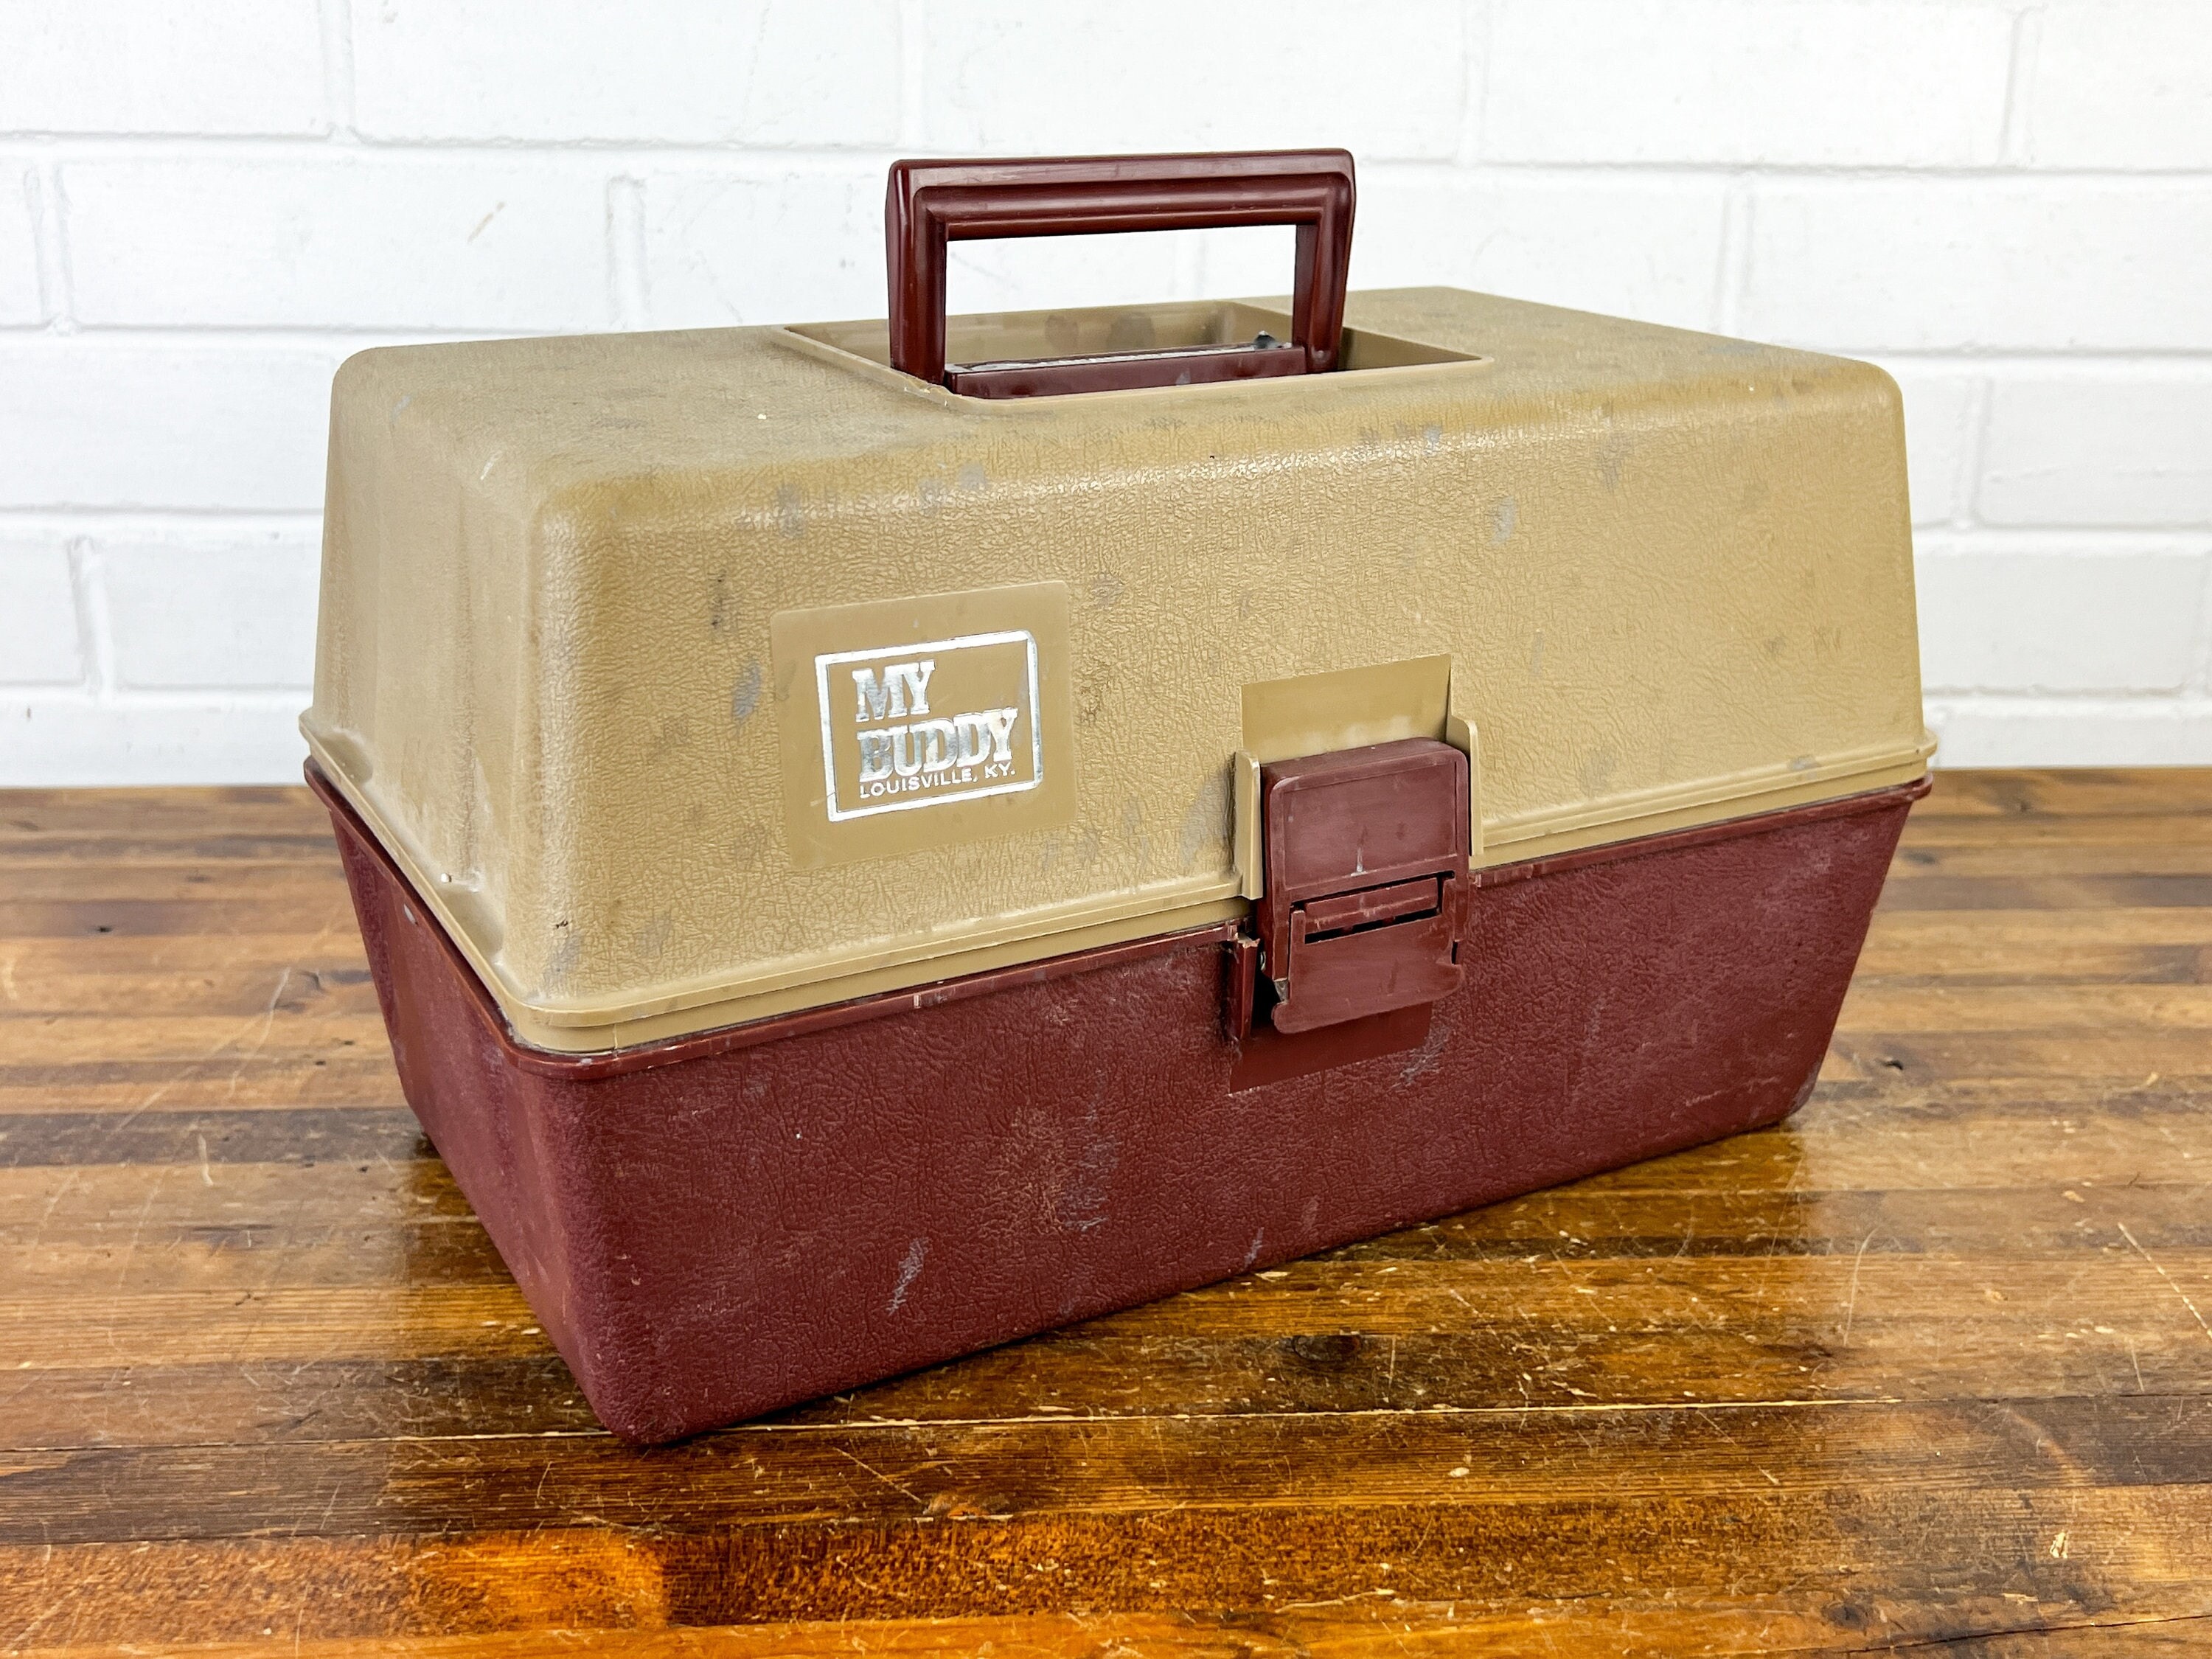 Vintage My Buddy fishing tackle box — Kitsch, please!